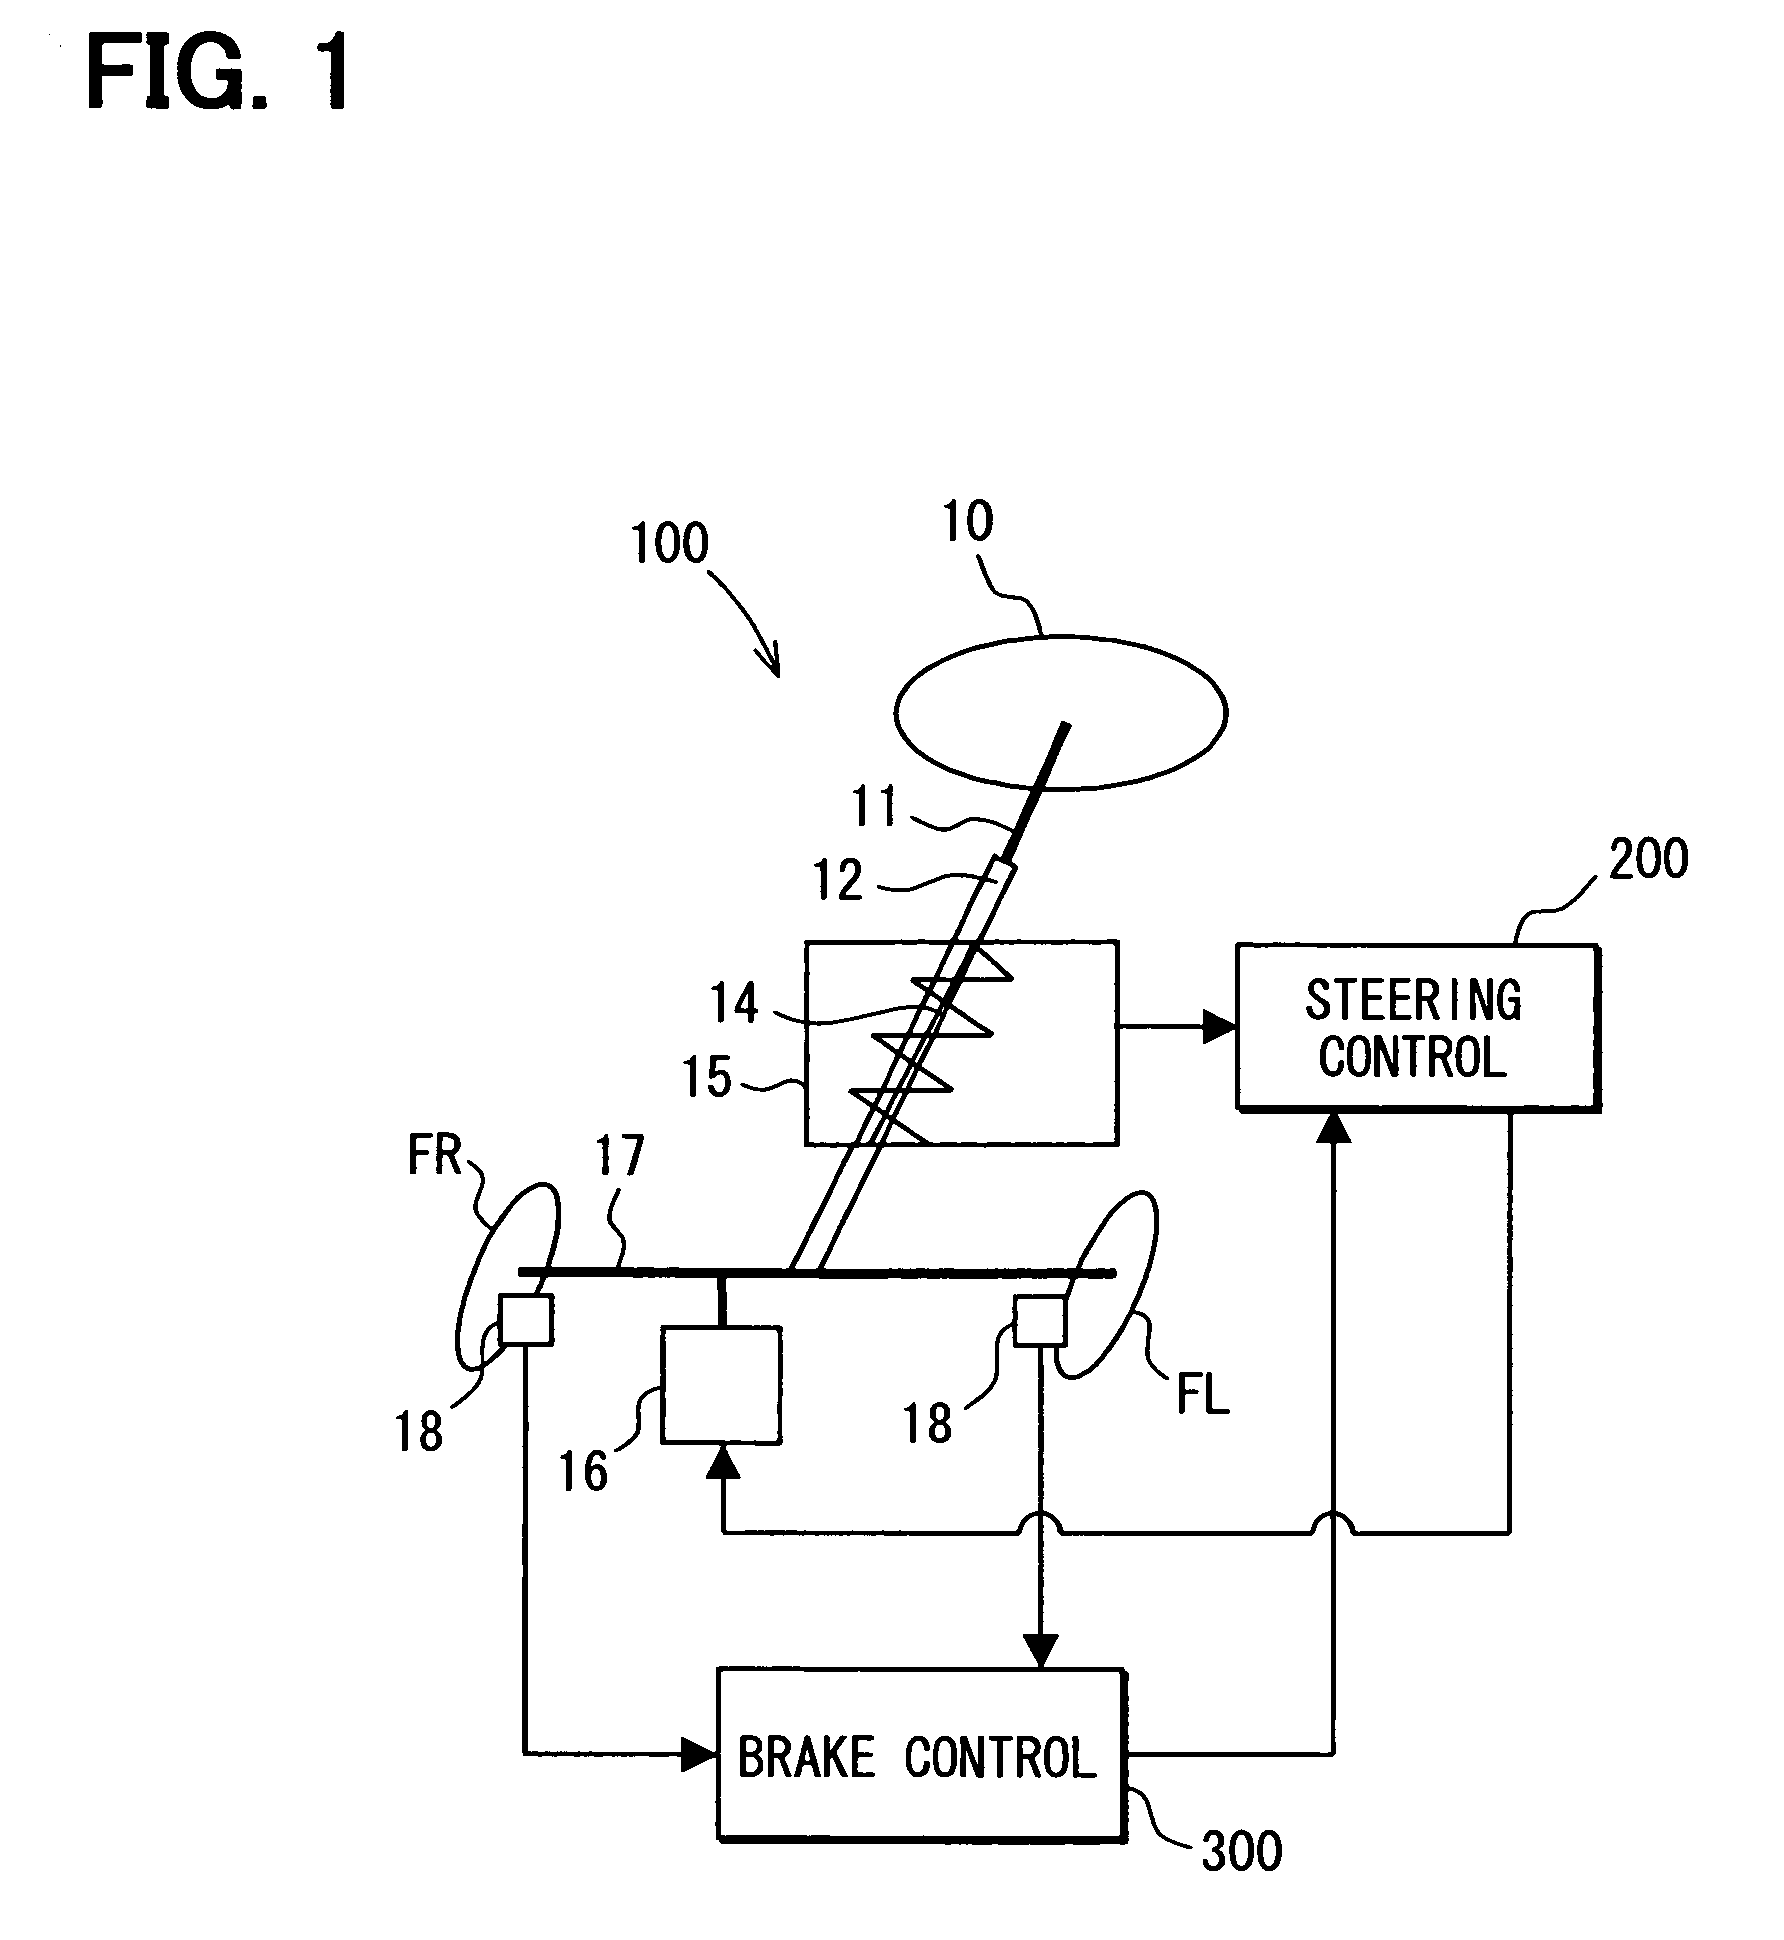 Apparatus for controlling vehicle